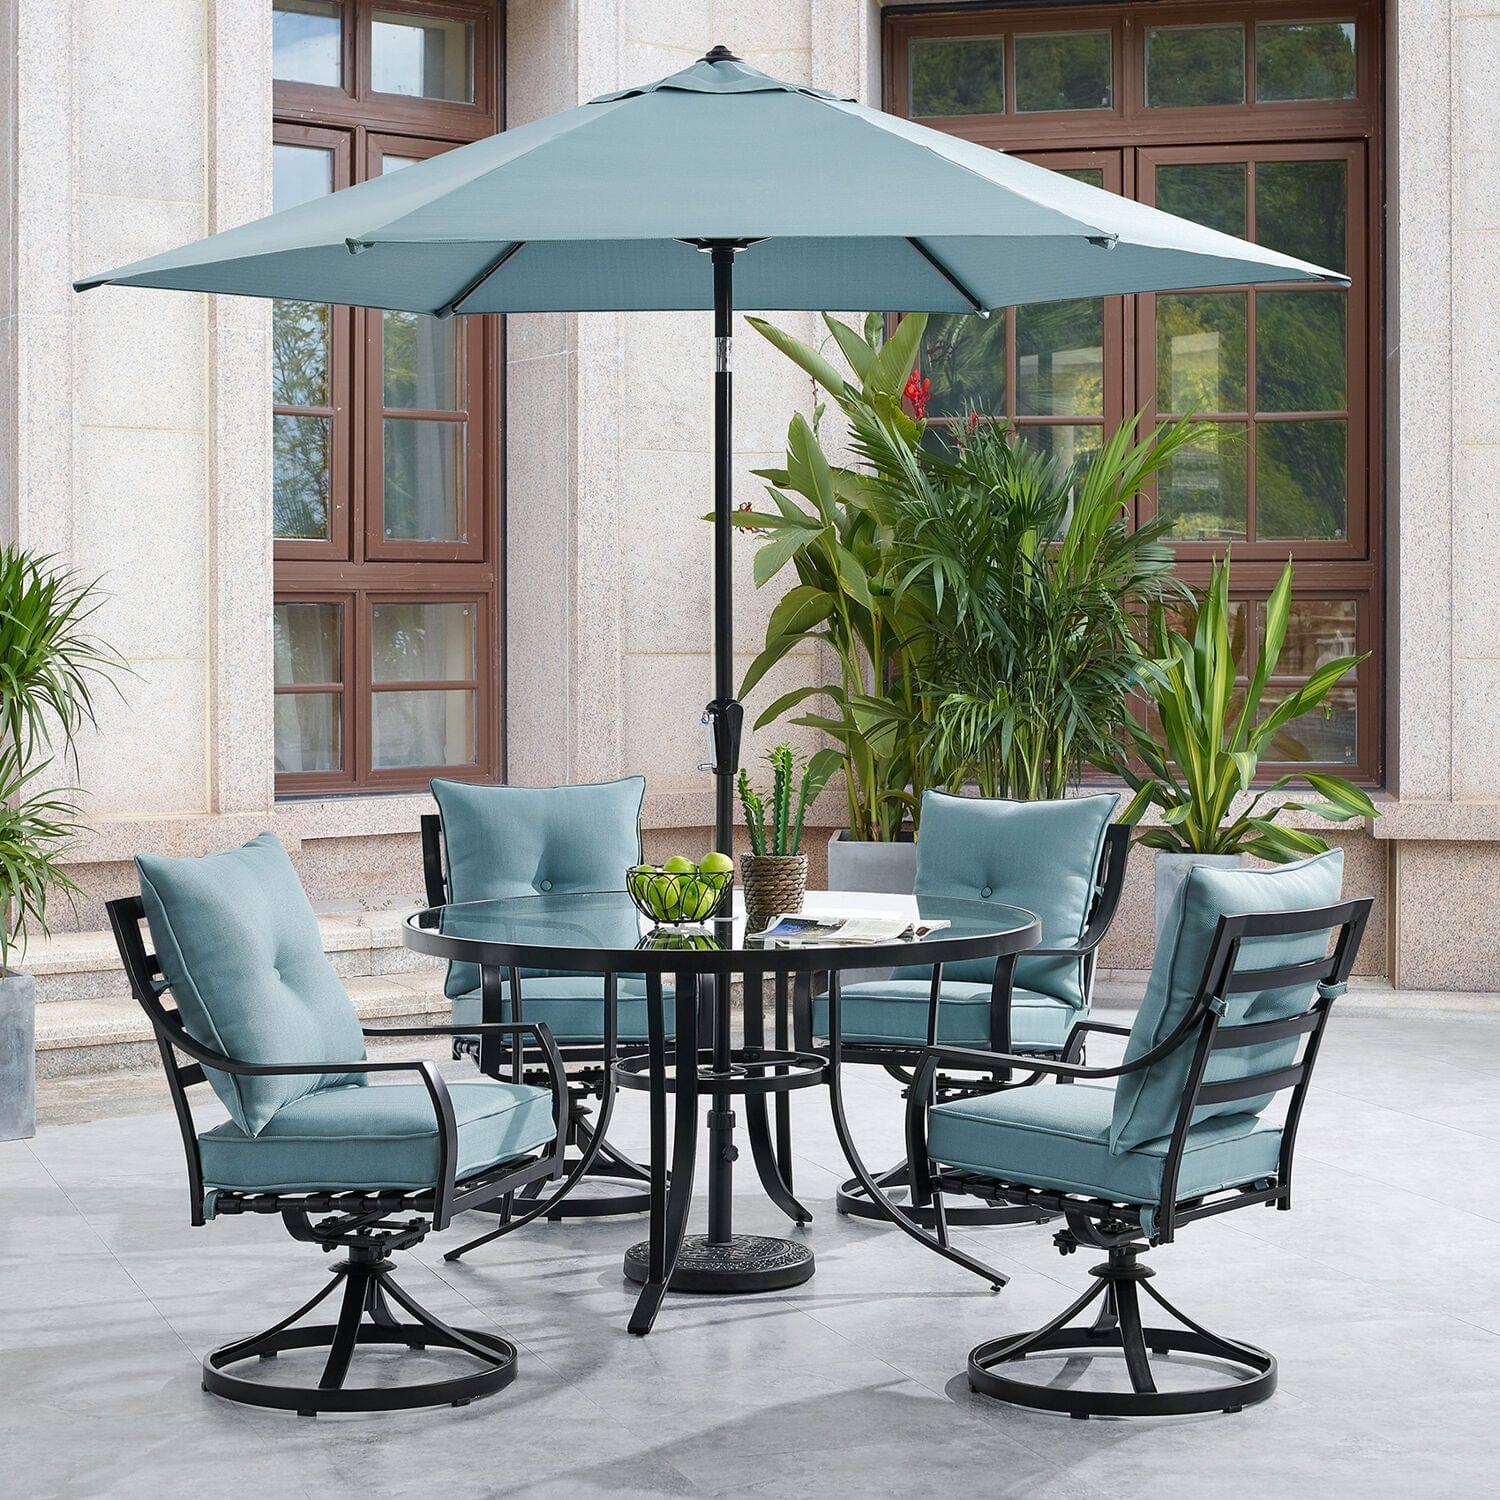 Hanover Outdoor Dining Set Hanover Lavallette 5-Piece Dining Set in Ocean Blue with 4 Swivel Rockers, 52-In. Round Glass-Top Table, Umbrella, and Base | LAVDN5PCSWRD-BLU-SU